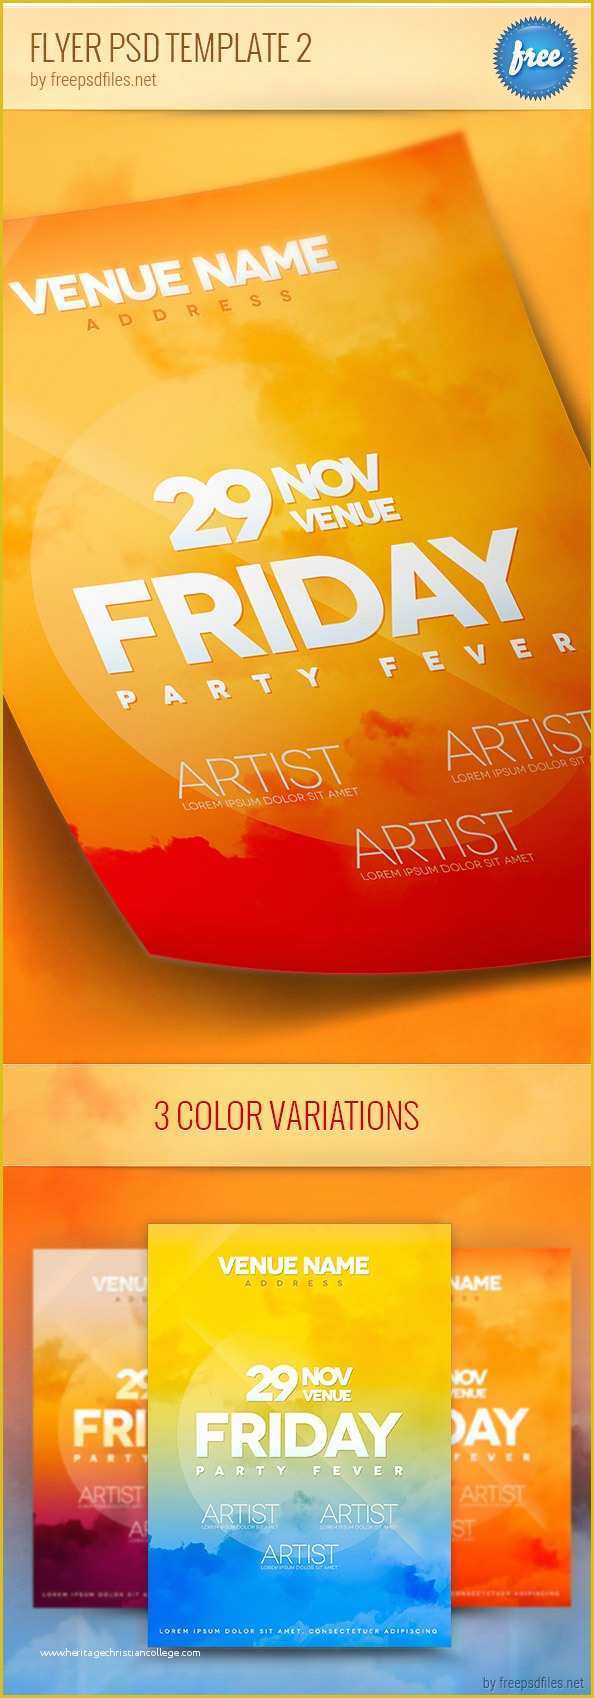 Free Flyer Design Templates Of Flyer Psd Template 2 Free Psd Files